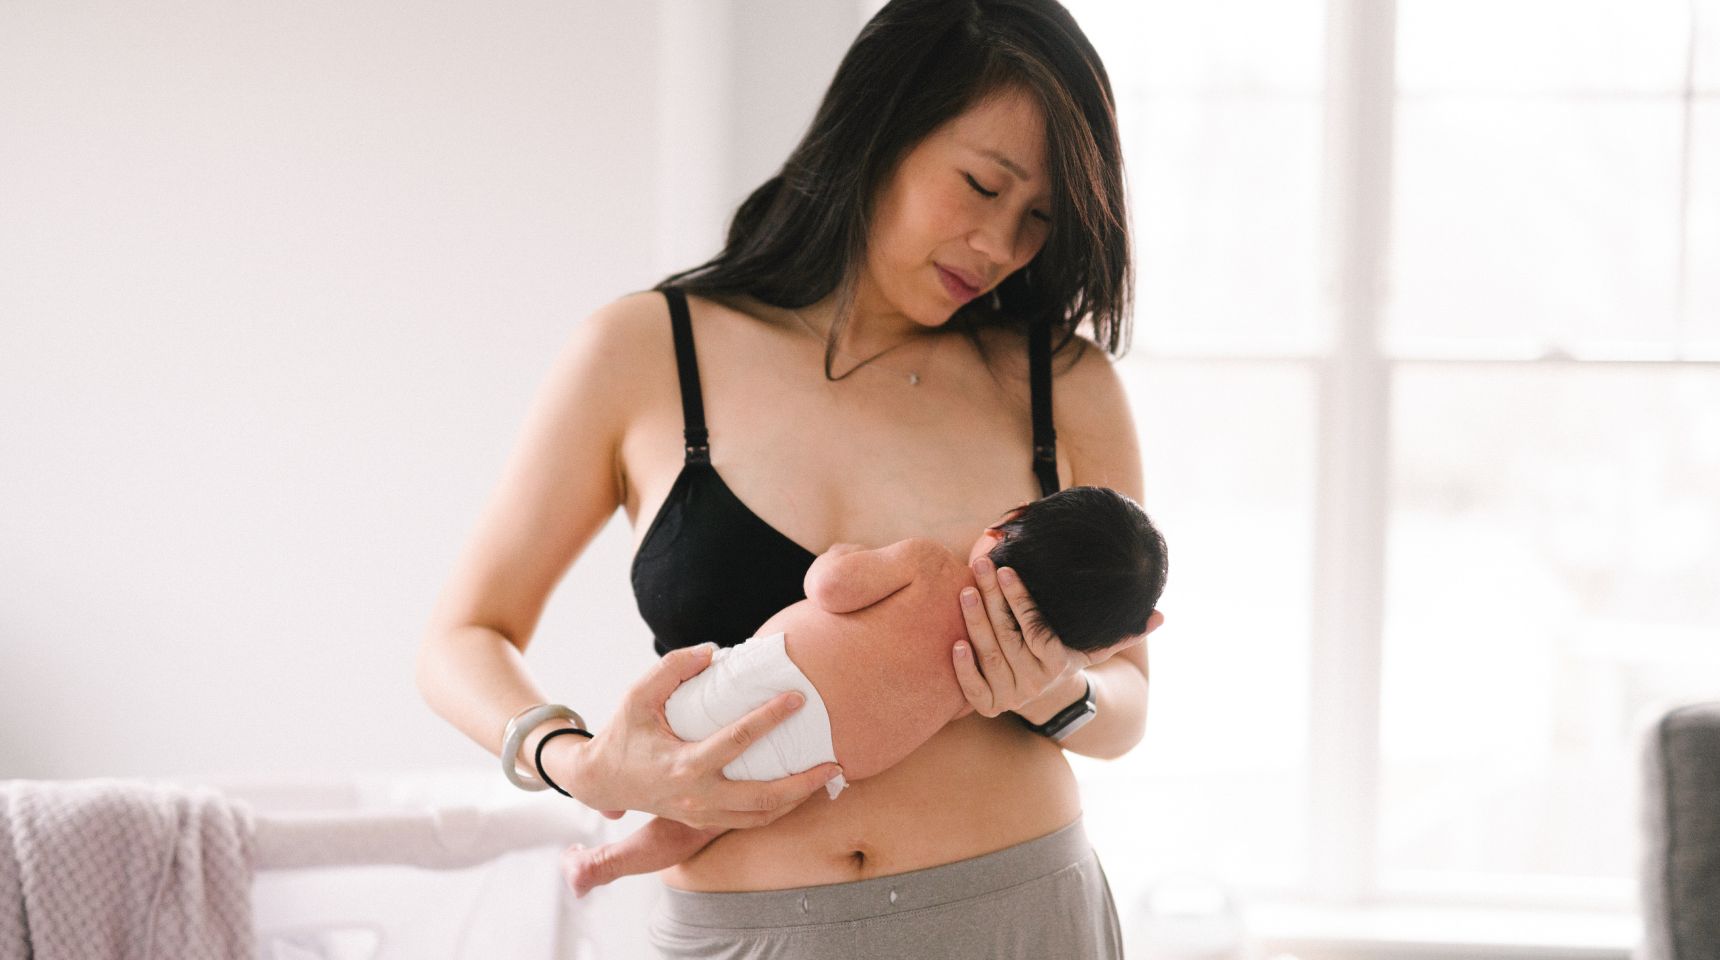 Pumping Breastmilk Is Hard, So I Stopped—And That's Okay - Baby Chick